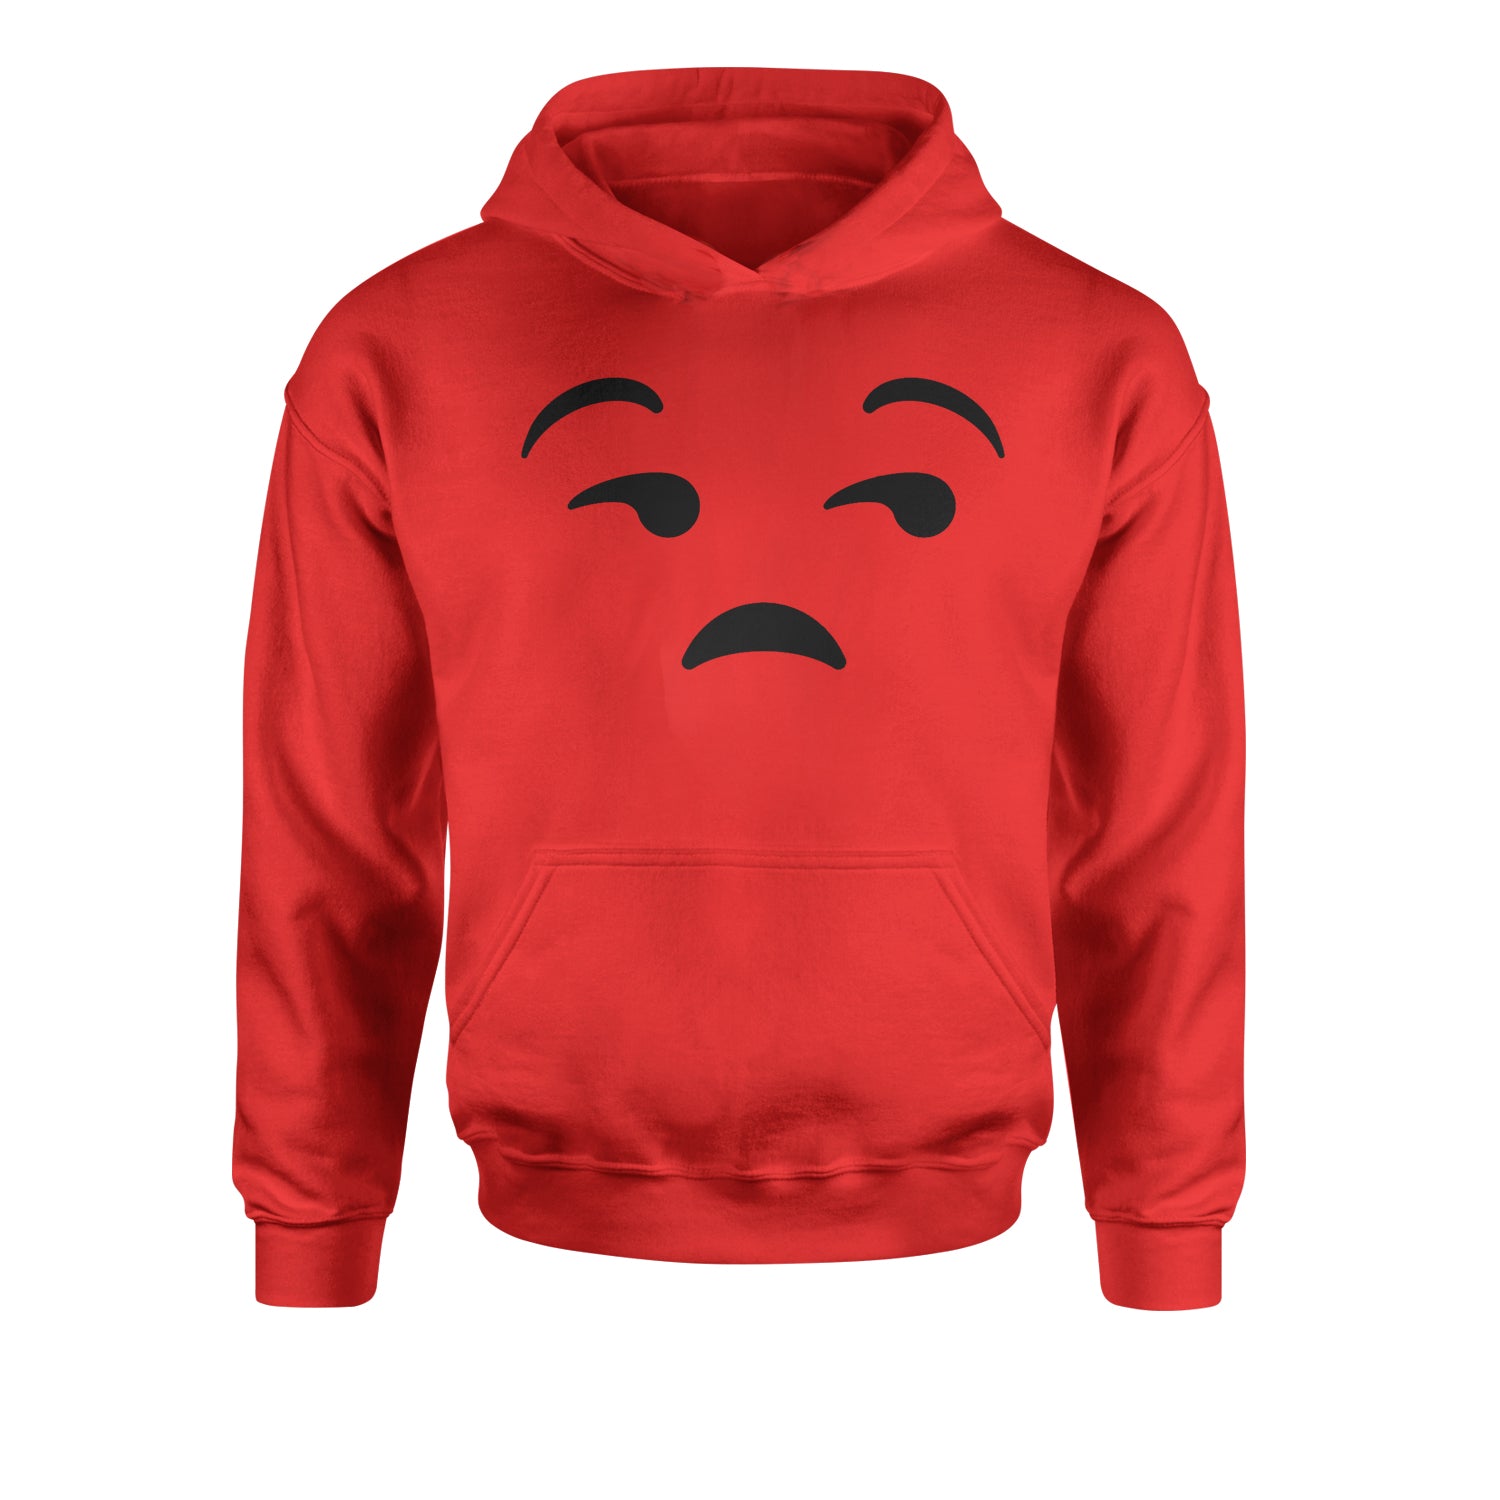 Emoticon Whatever Smile Face Youth-Sized Hoodie cosplay, costume, dress, emoji, emote, face, halloween, smiley, up, yellow, youth-sized by Expression Tees